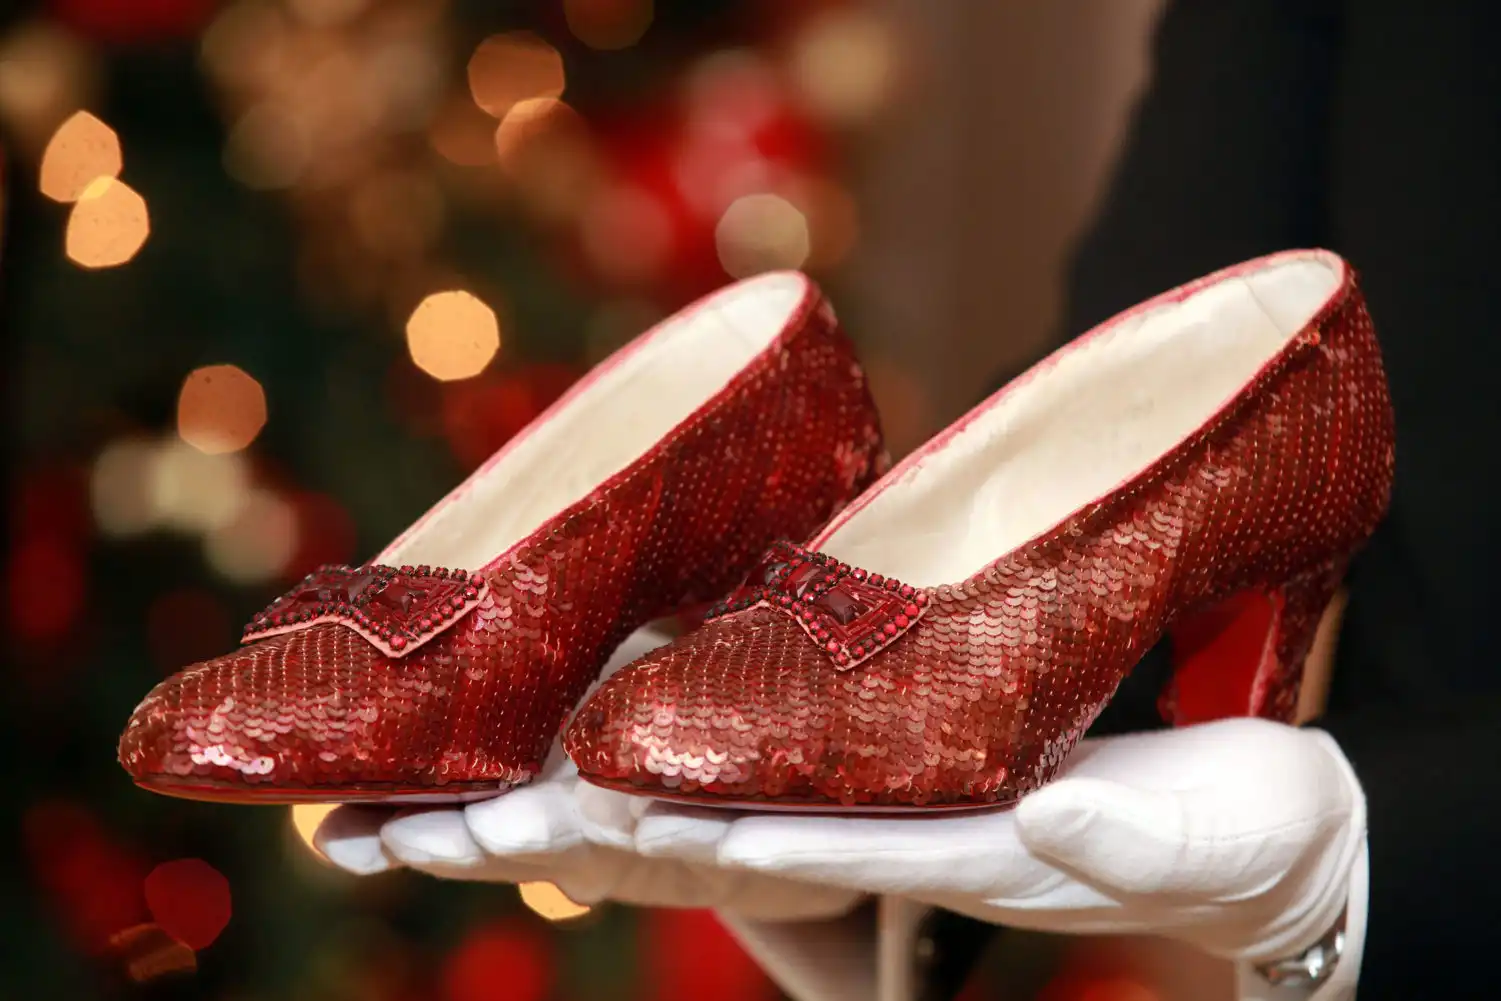 Saga of Stolen Ruby Slippers Ends at Wizard of Oz Museum | Artnet News